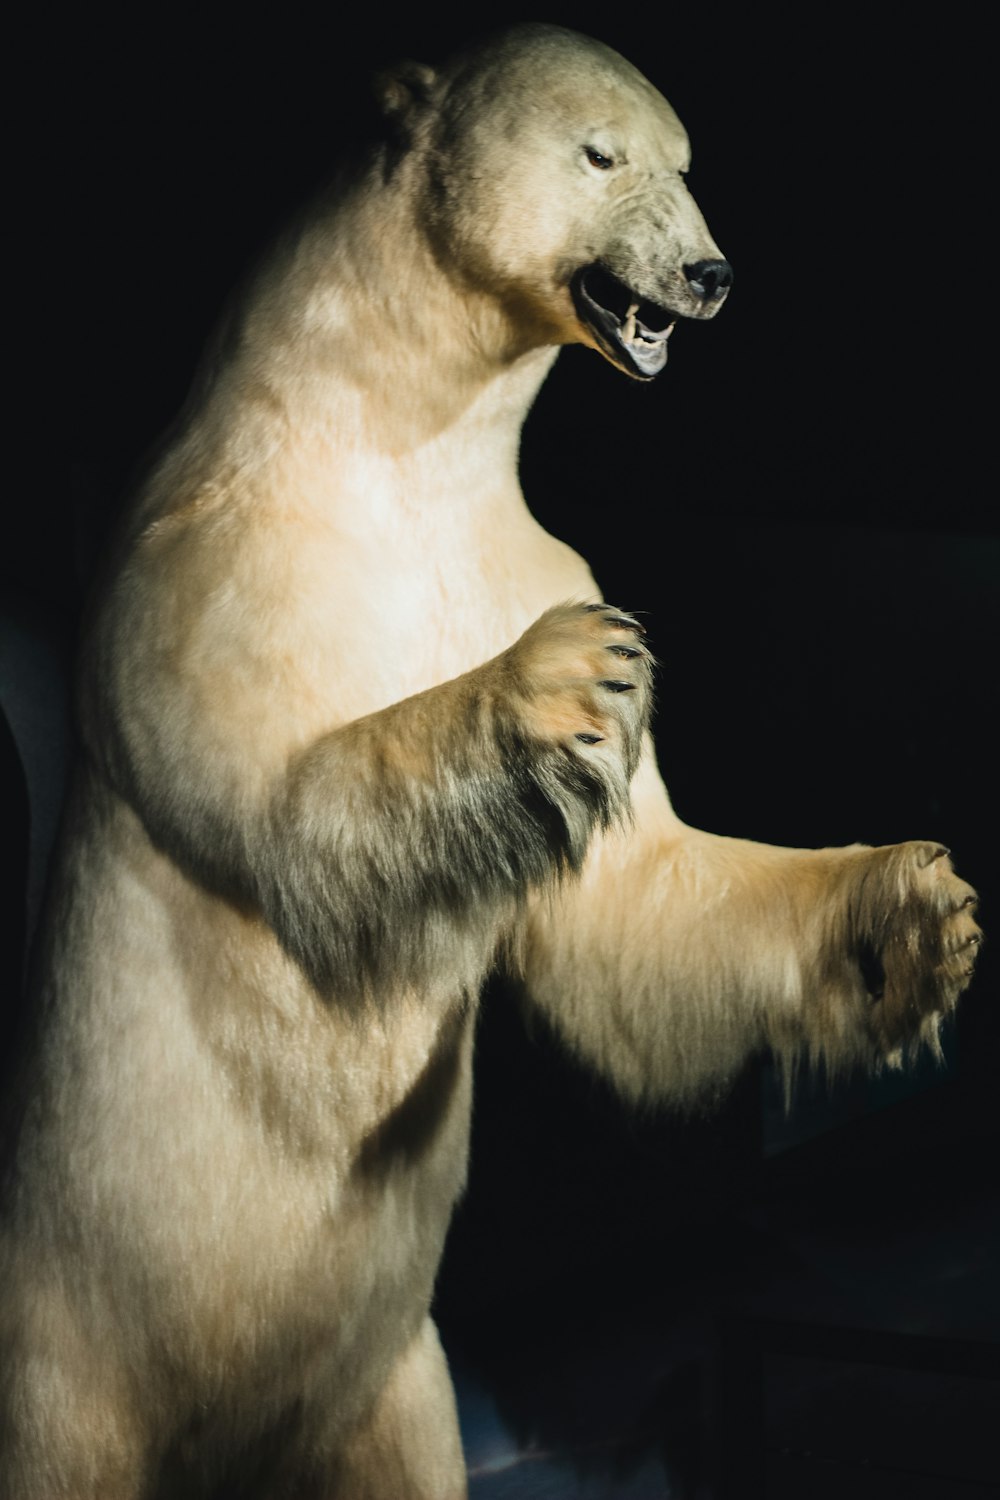 a bear with its paws up